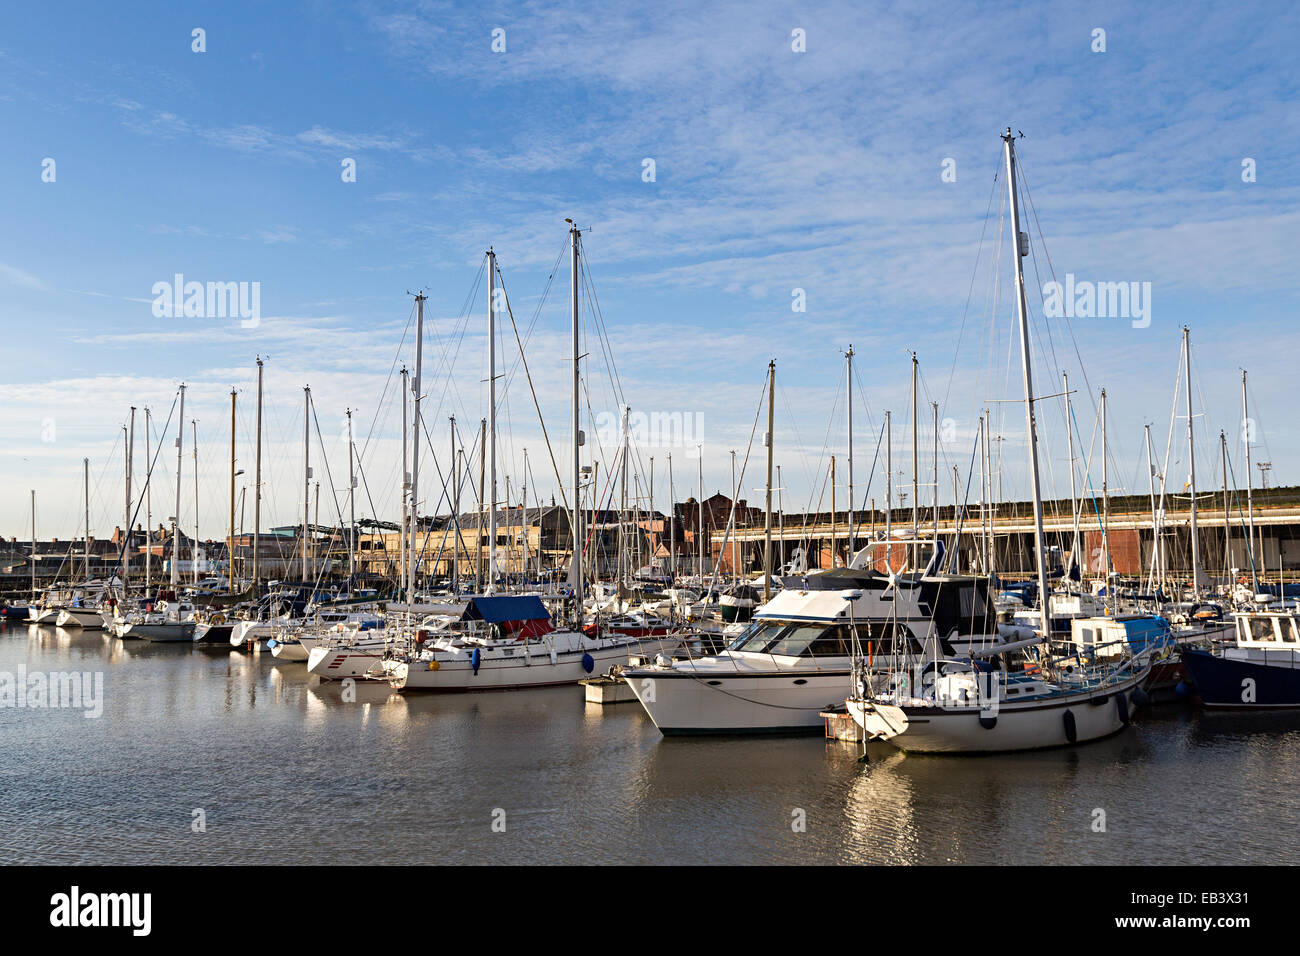 Boats in marina, Grimsby, Lincolnshire, England, UK Stock Photo